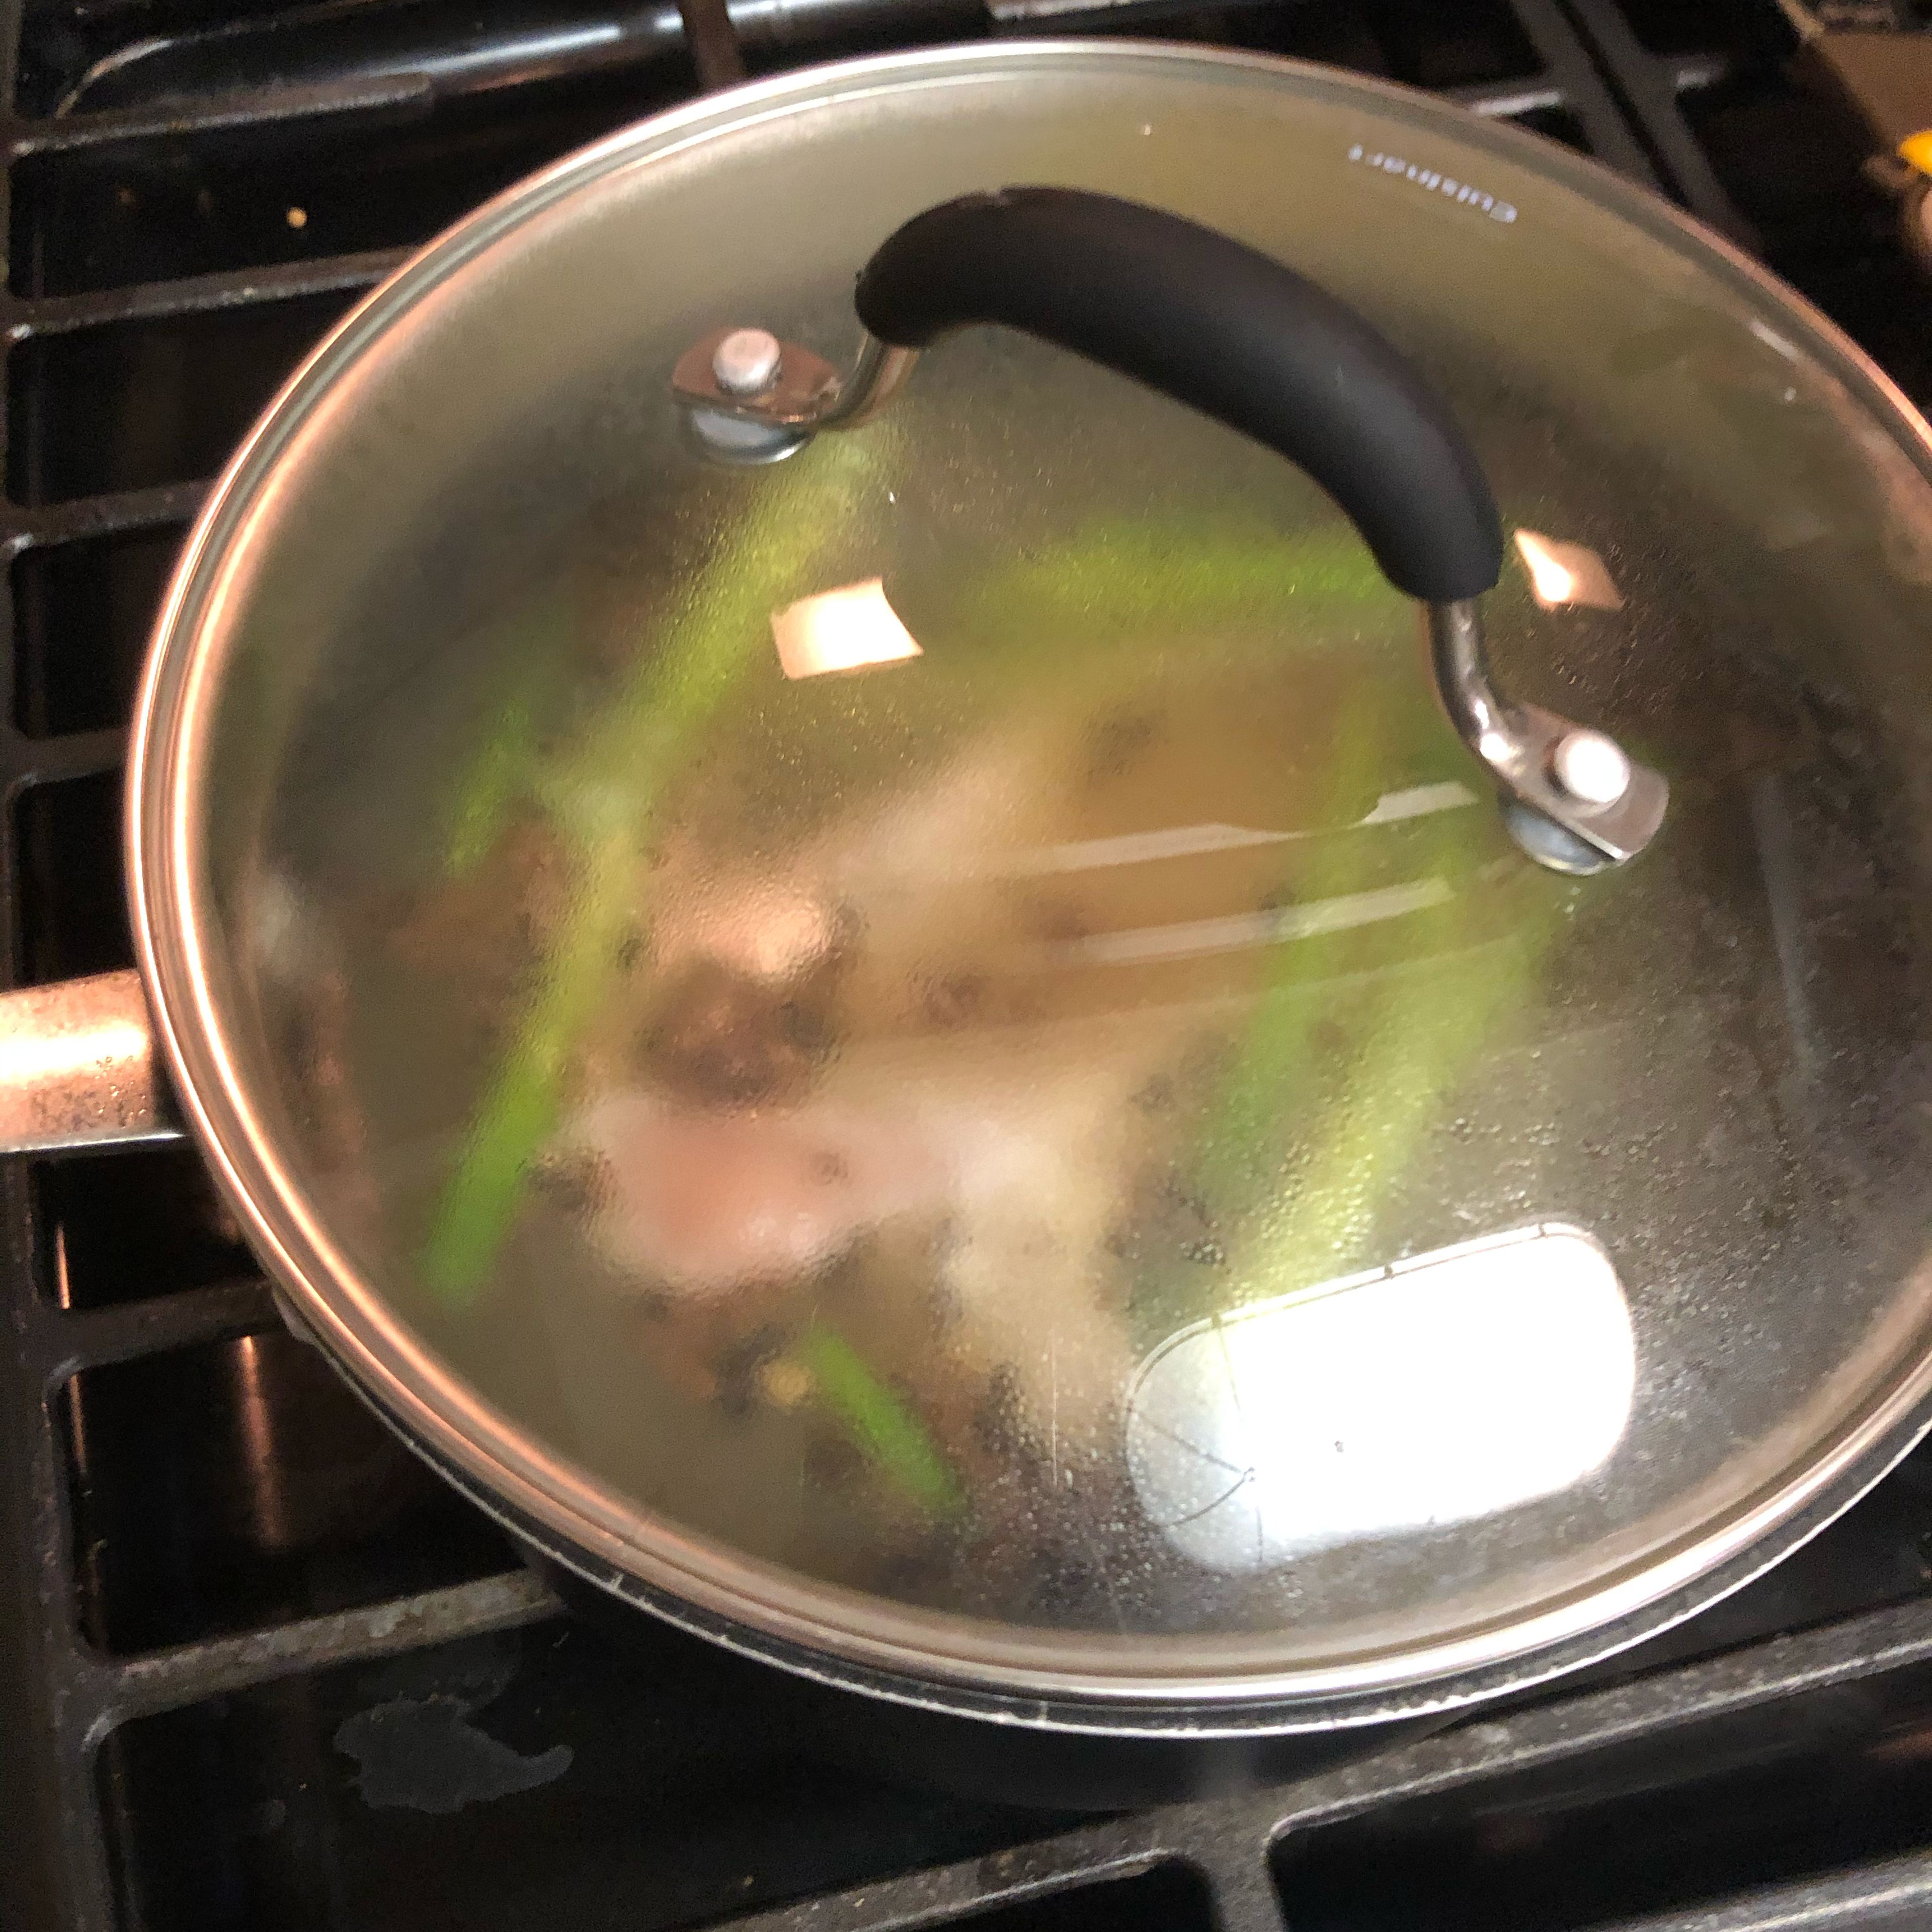 Add in the chicken breast and cover the pot. Let your chicken cook until pink is gone.